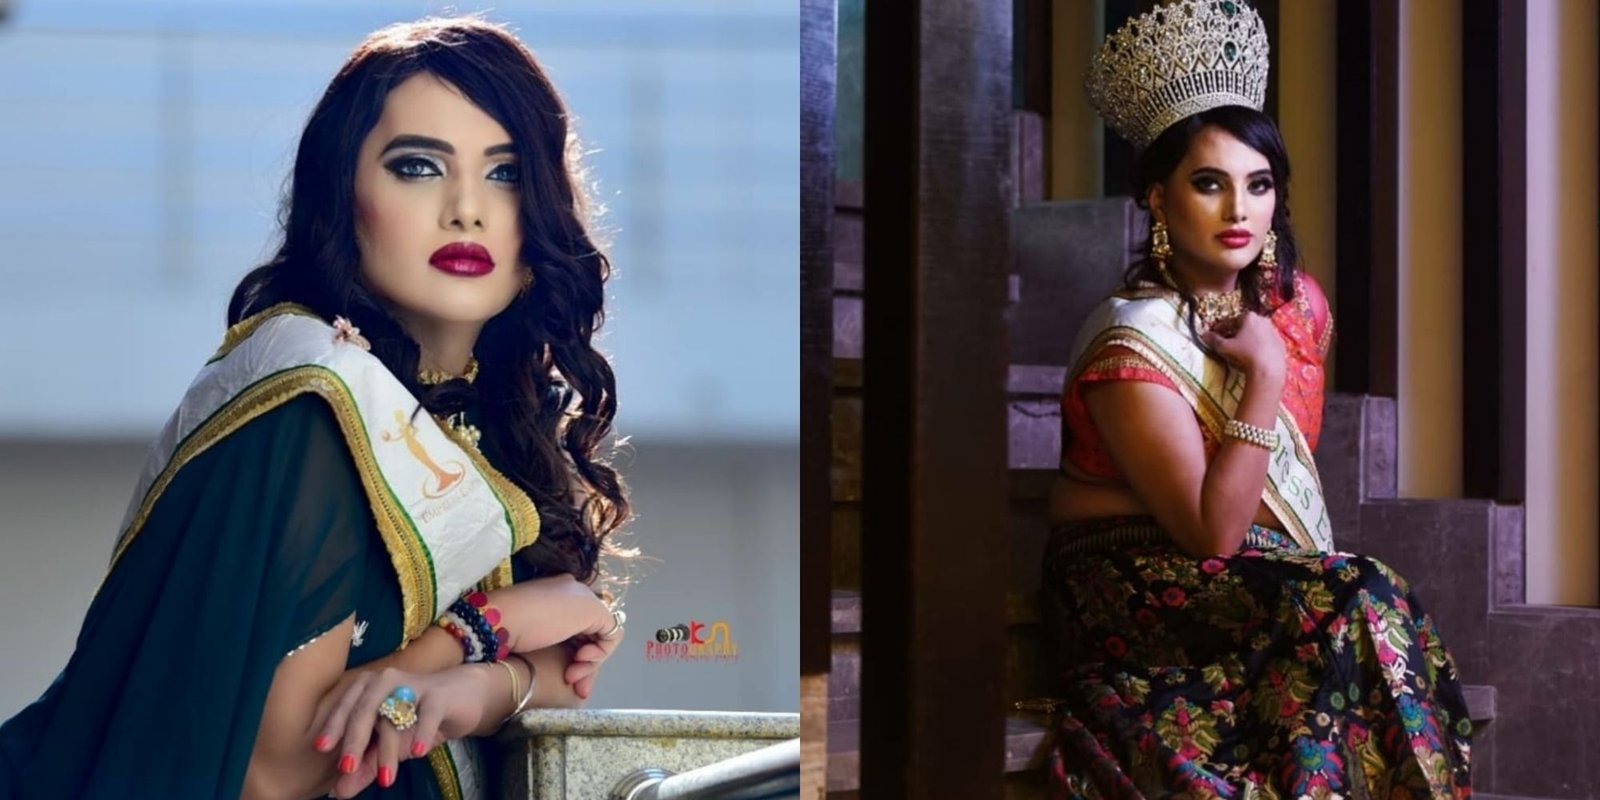 Naaz Joshi is India’s First Transgender Showstopper, Winner Of 8 Beauty Crowns